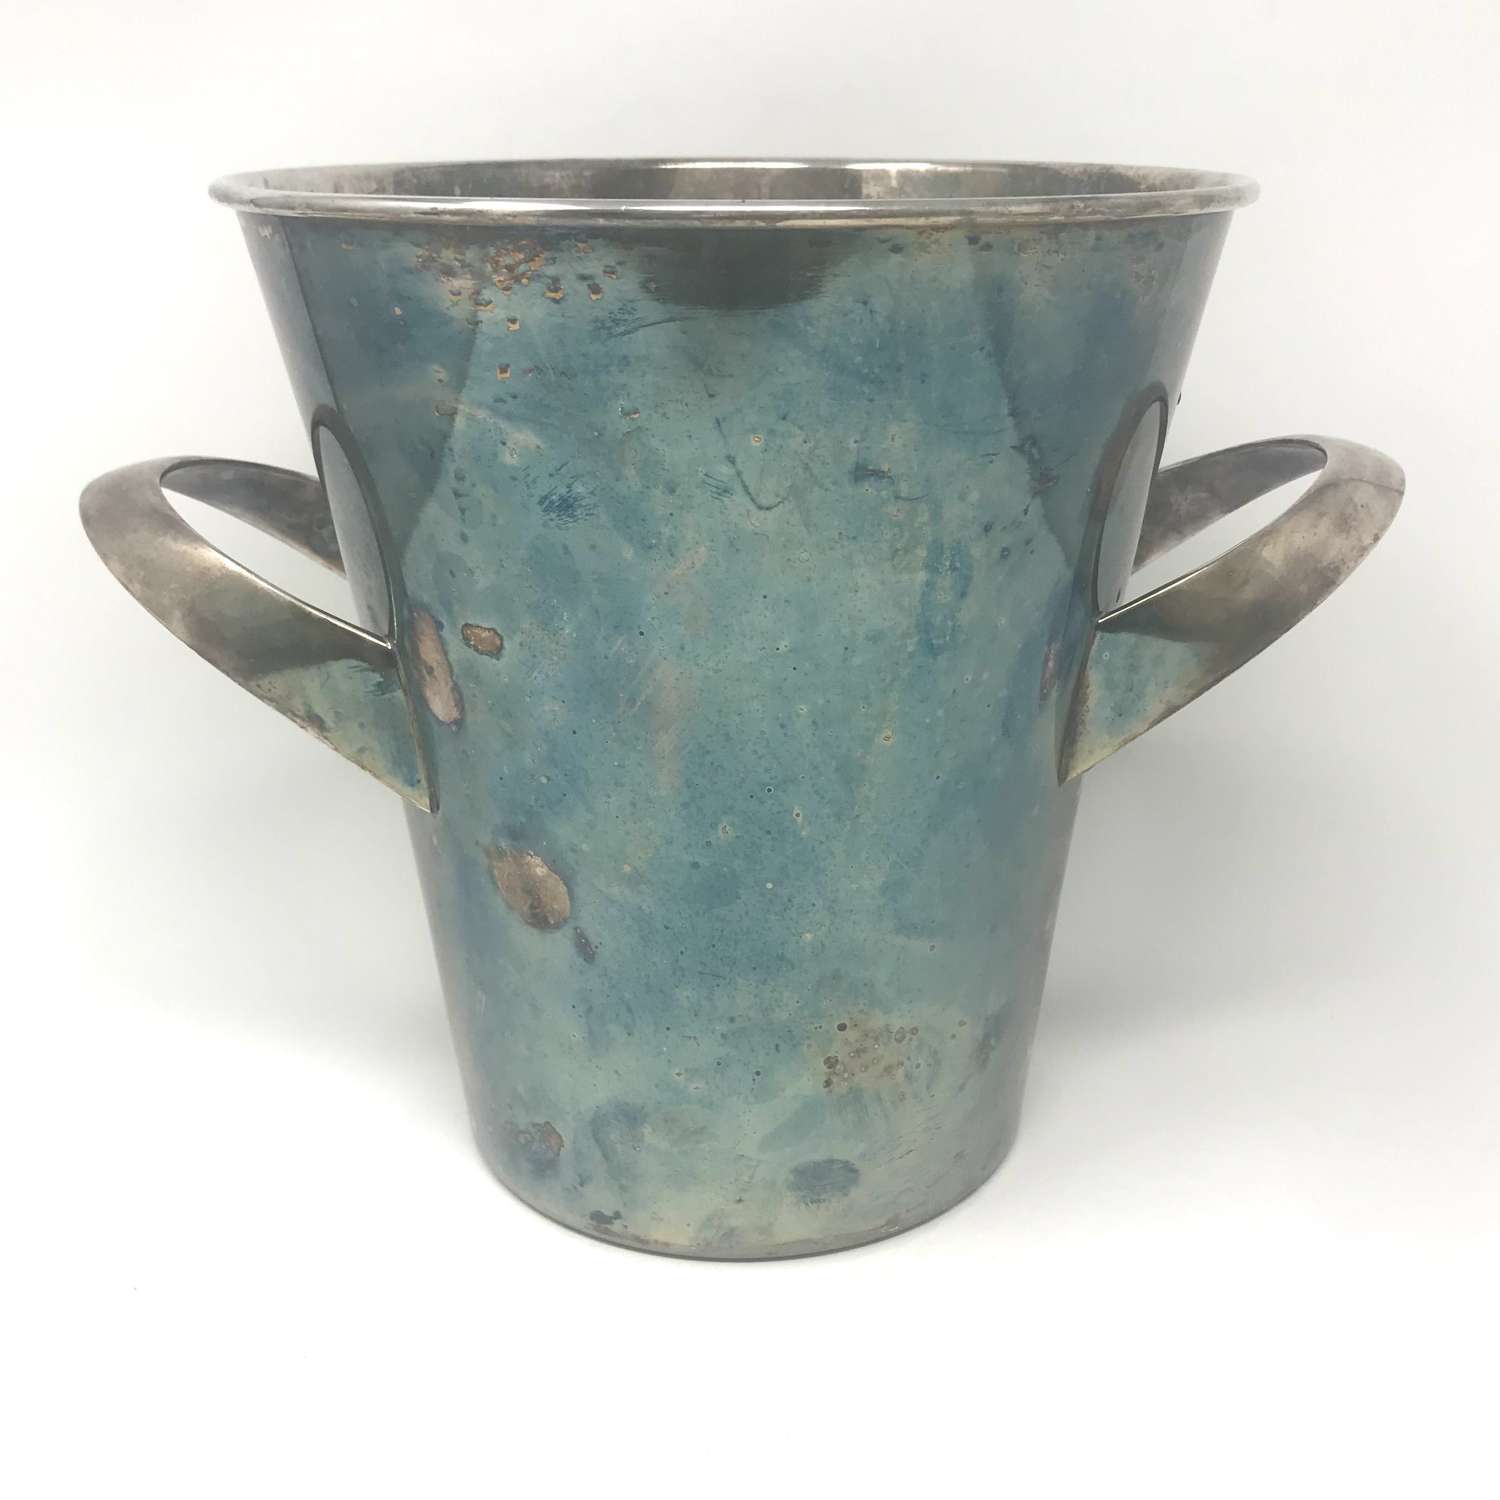 Kurt Mayer WMF silver plated champagne cooler with blue patina 1950s